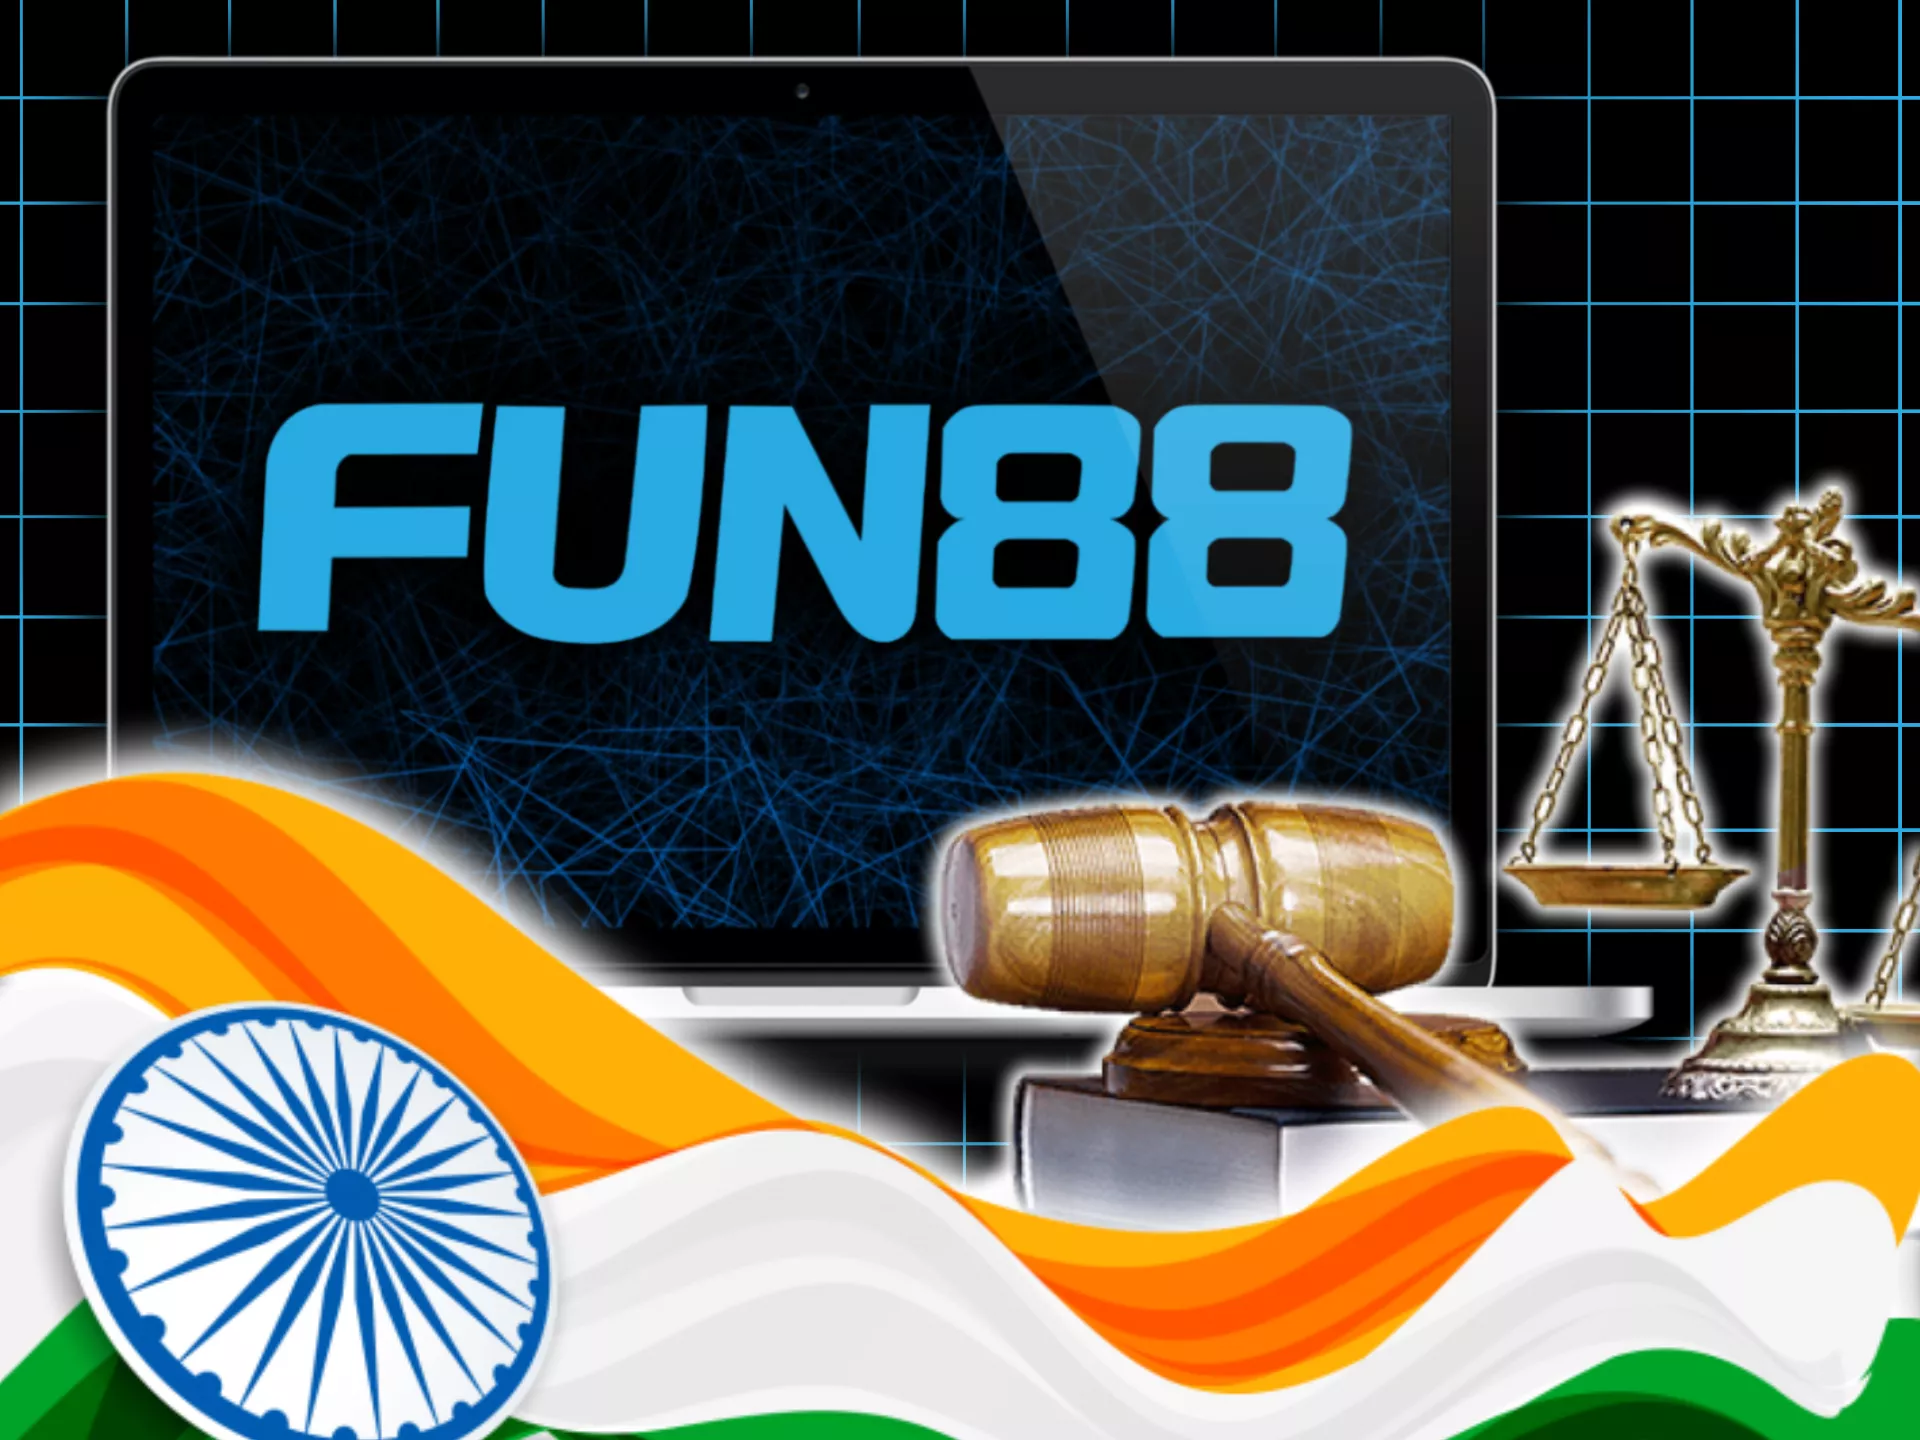 Fun88 is safe and legal for betting in India.